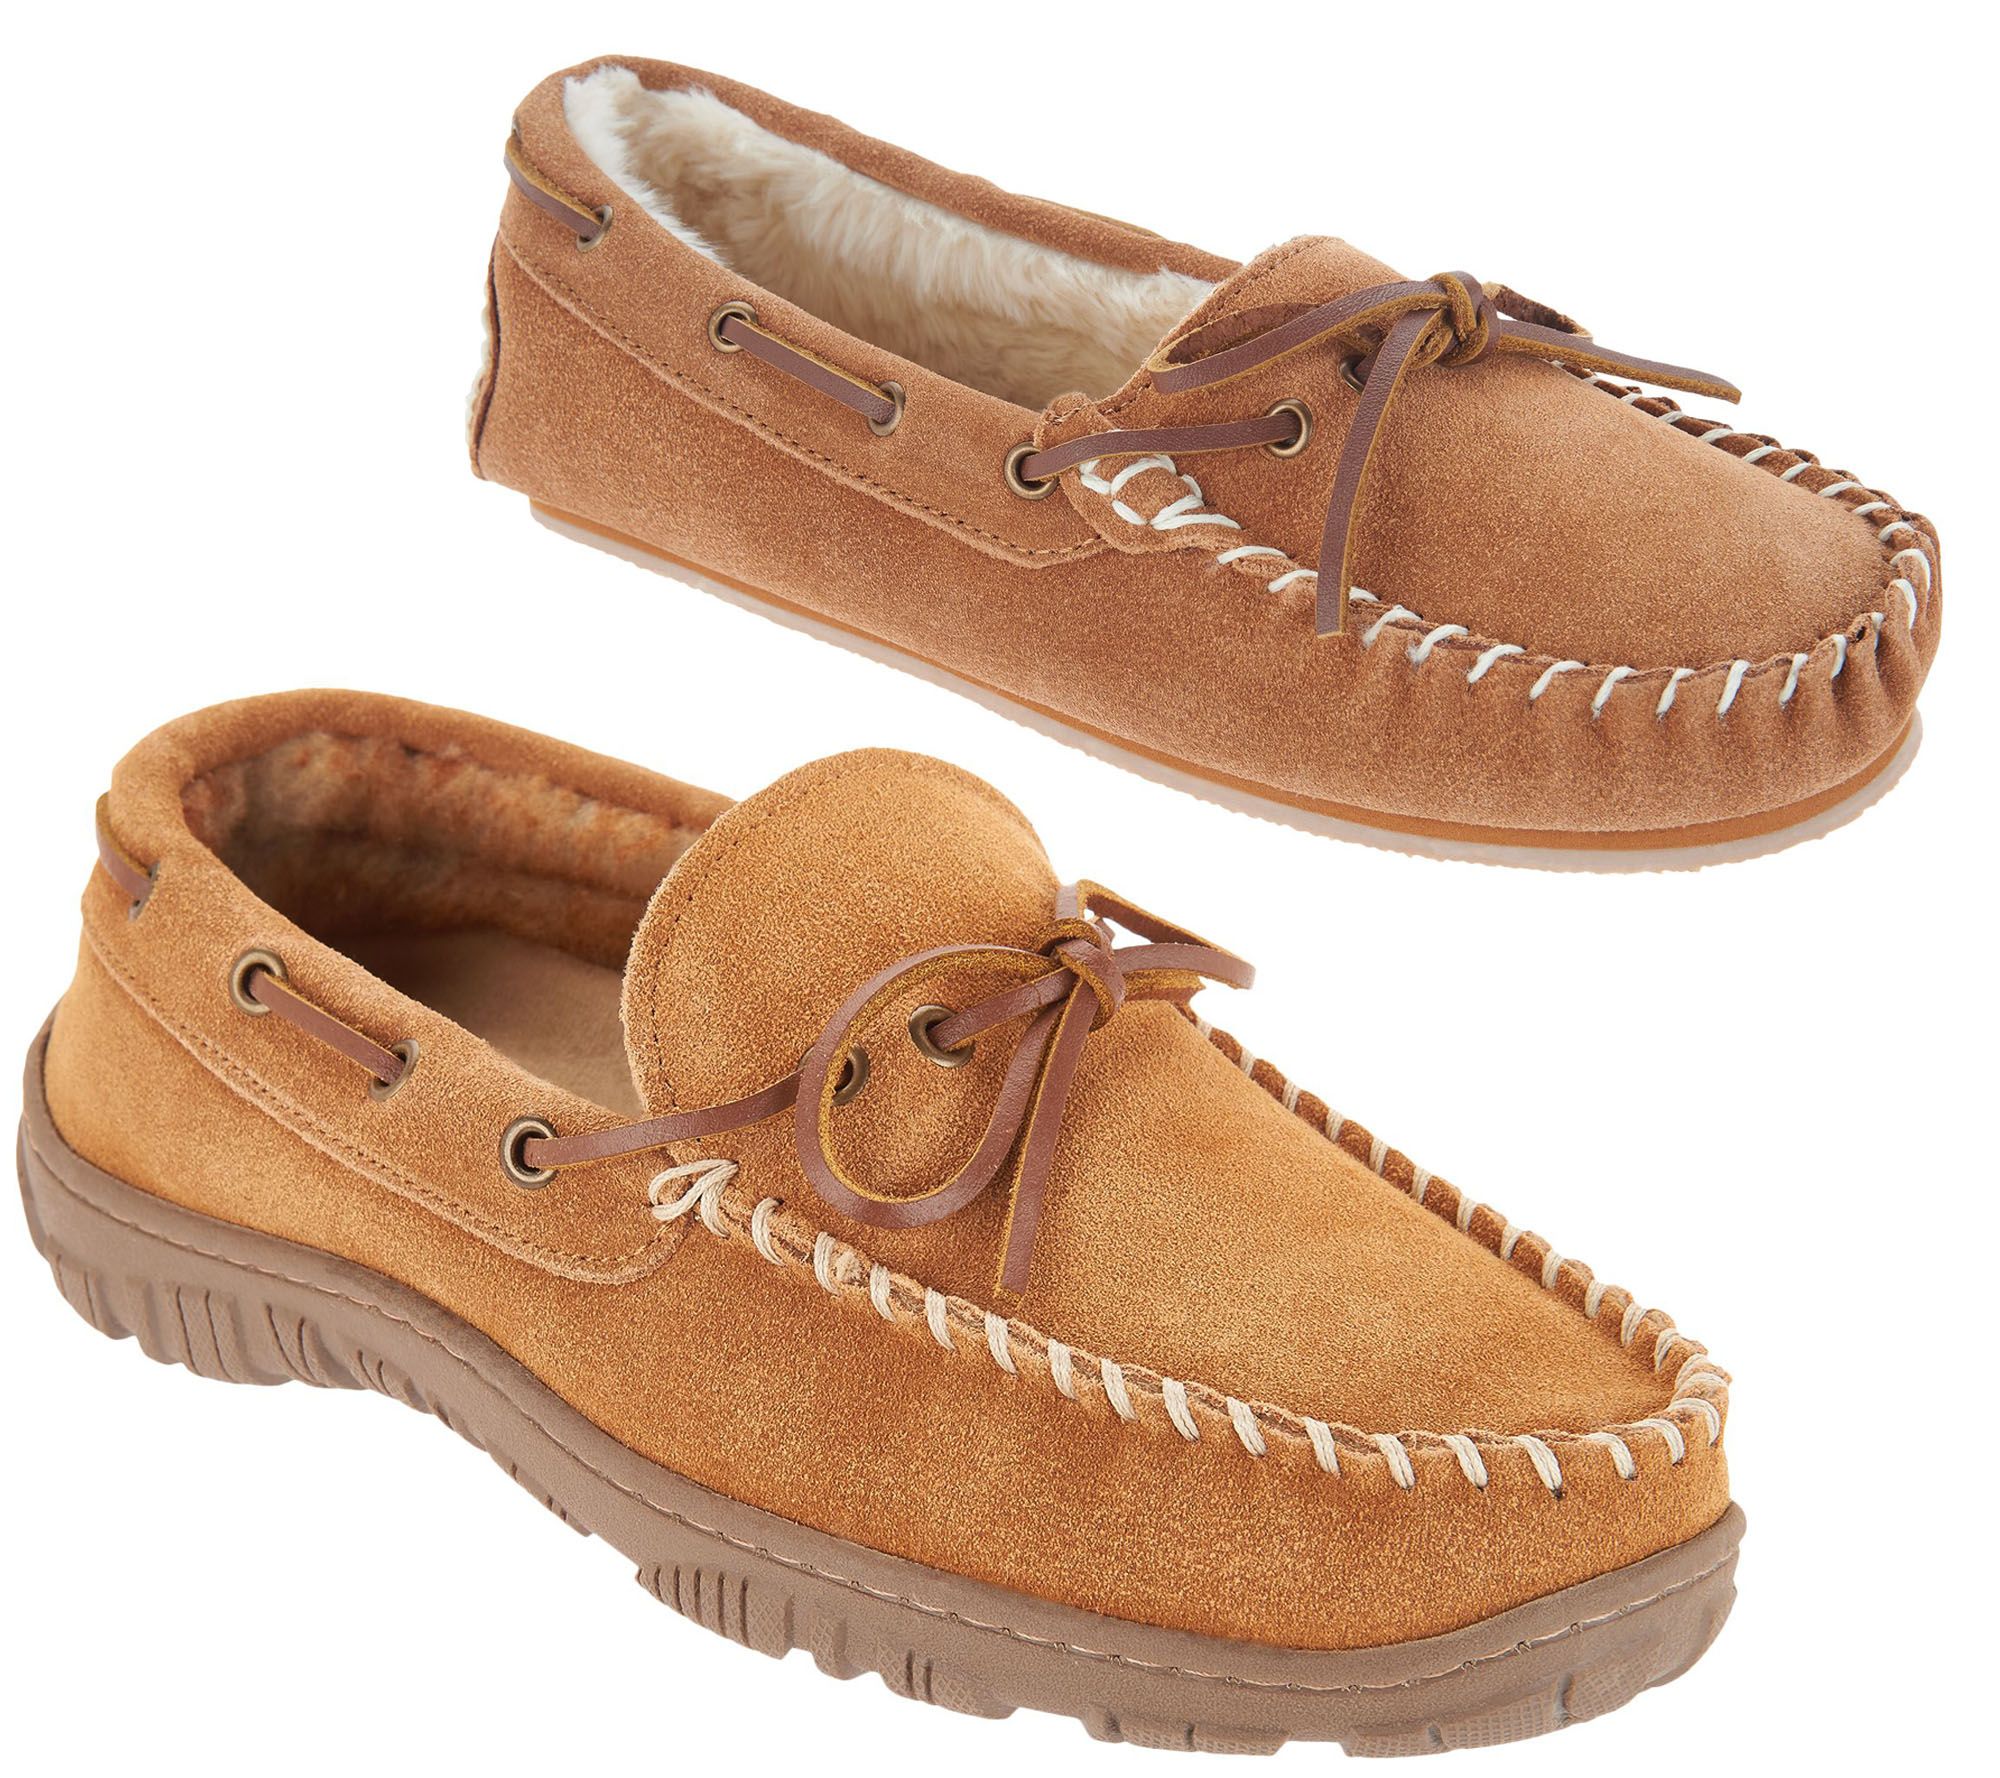 Clarks Suede Moccasin Slippers - QVC.com